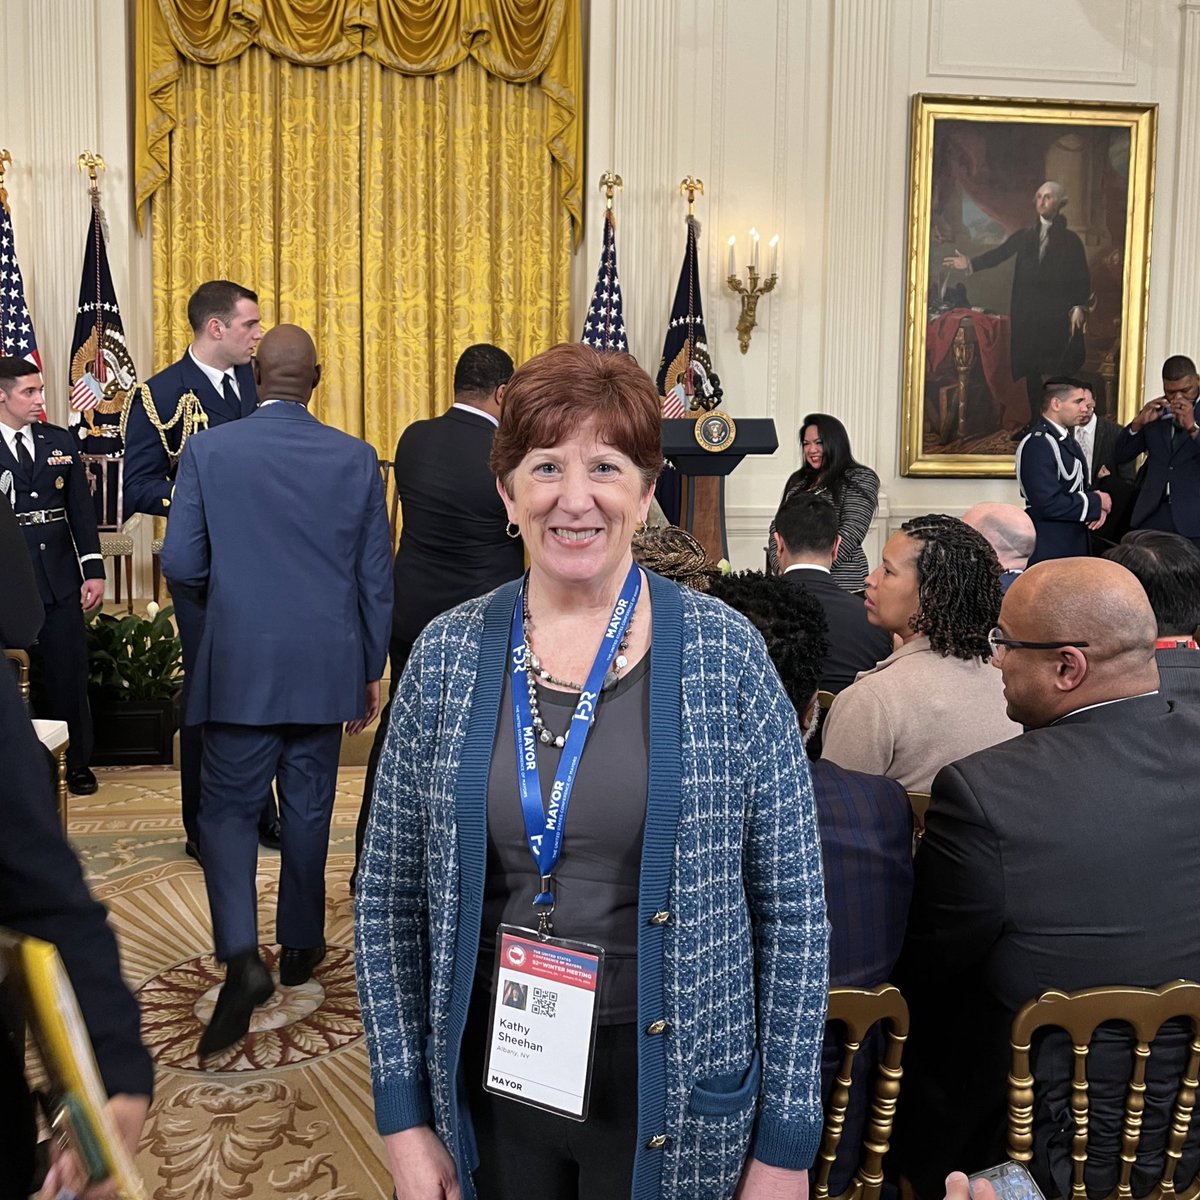 Getting ready to hear from @POTUS @JoeBiden as well as @SecretaryPete and @SecDebHaaland at the @WhiteHouse alongside my fellow @usmayors! #MayorsDC24